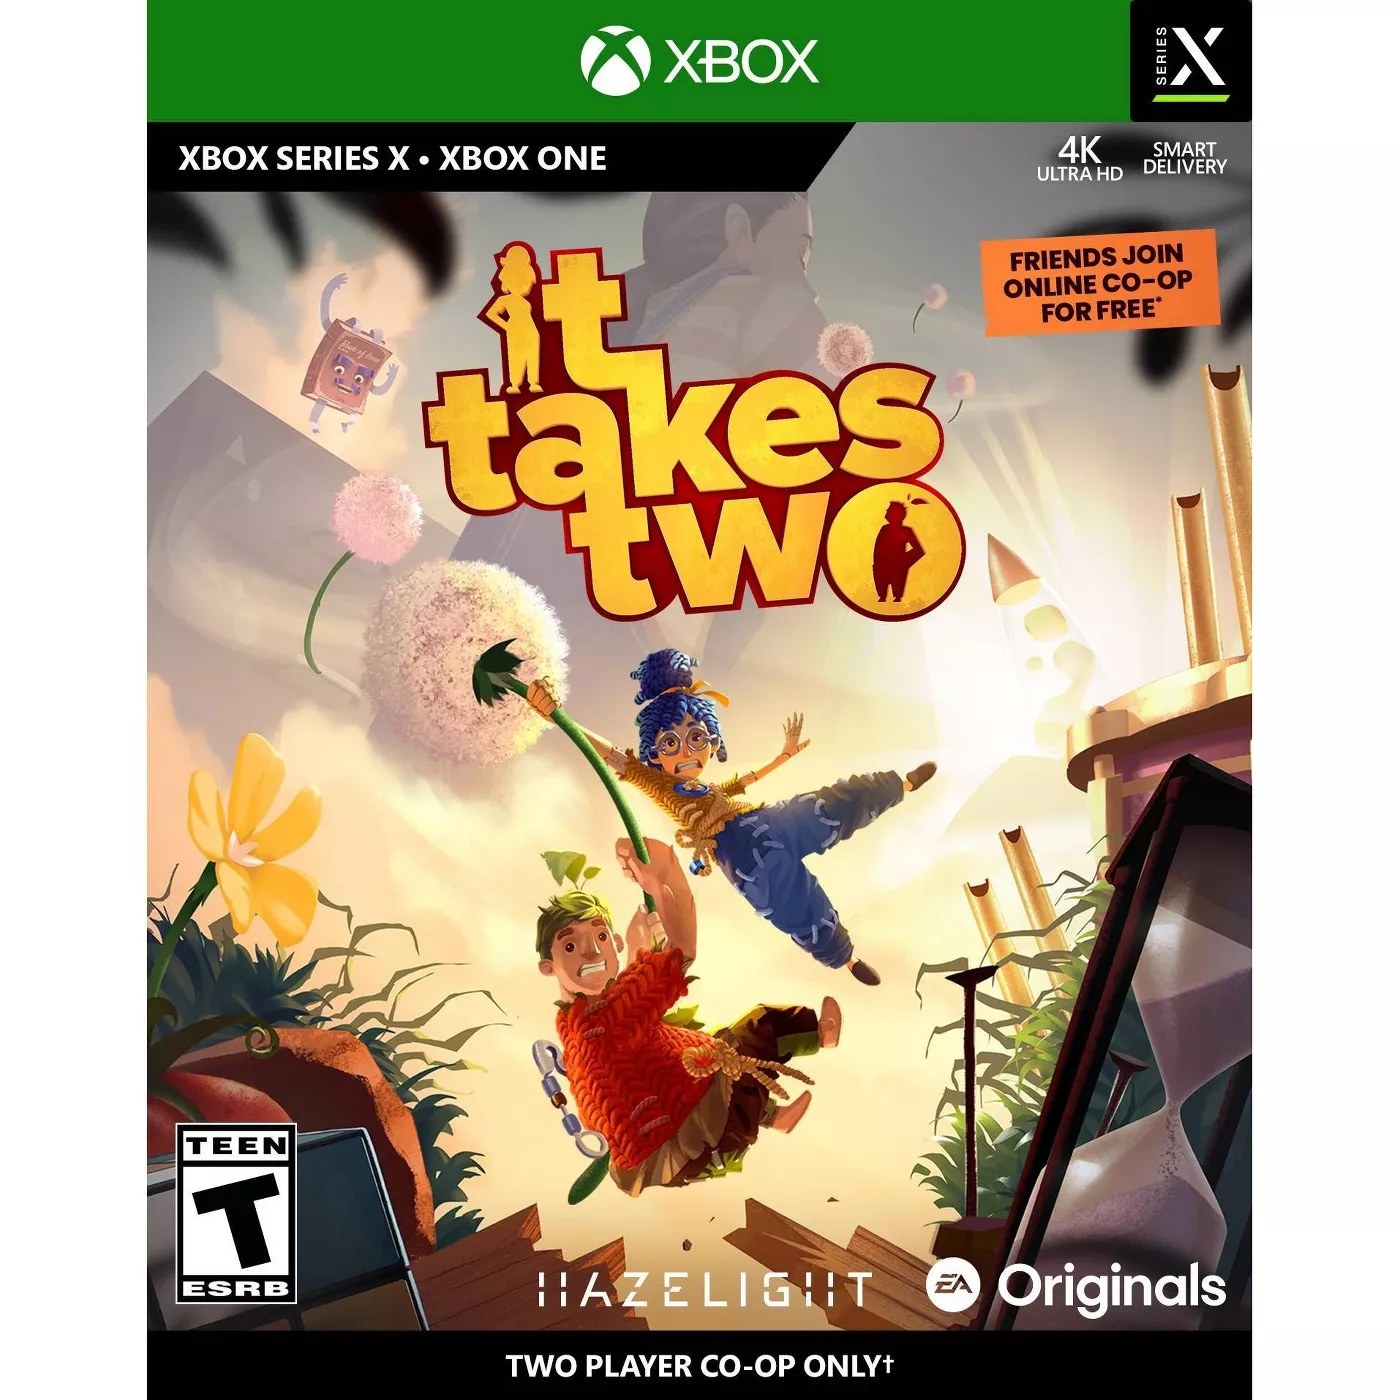 The It Takes Two video game